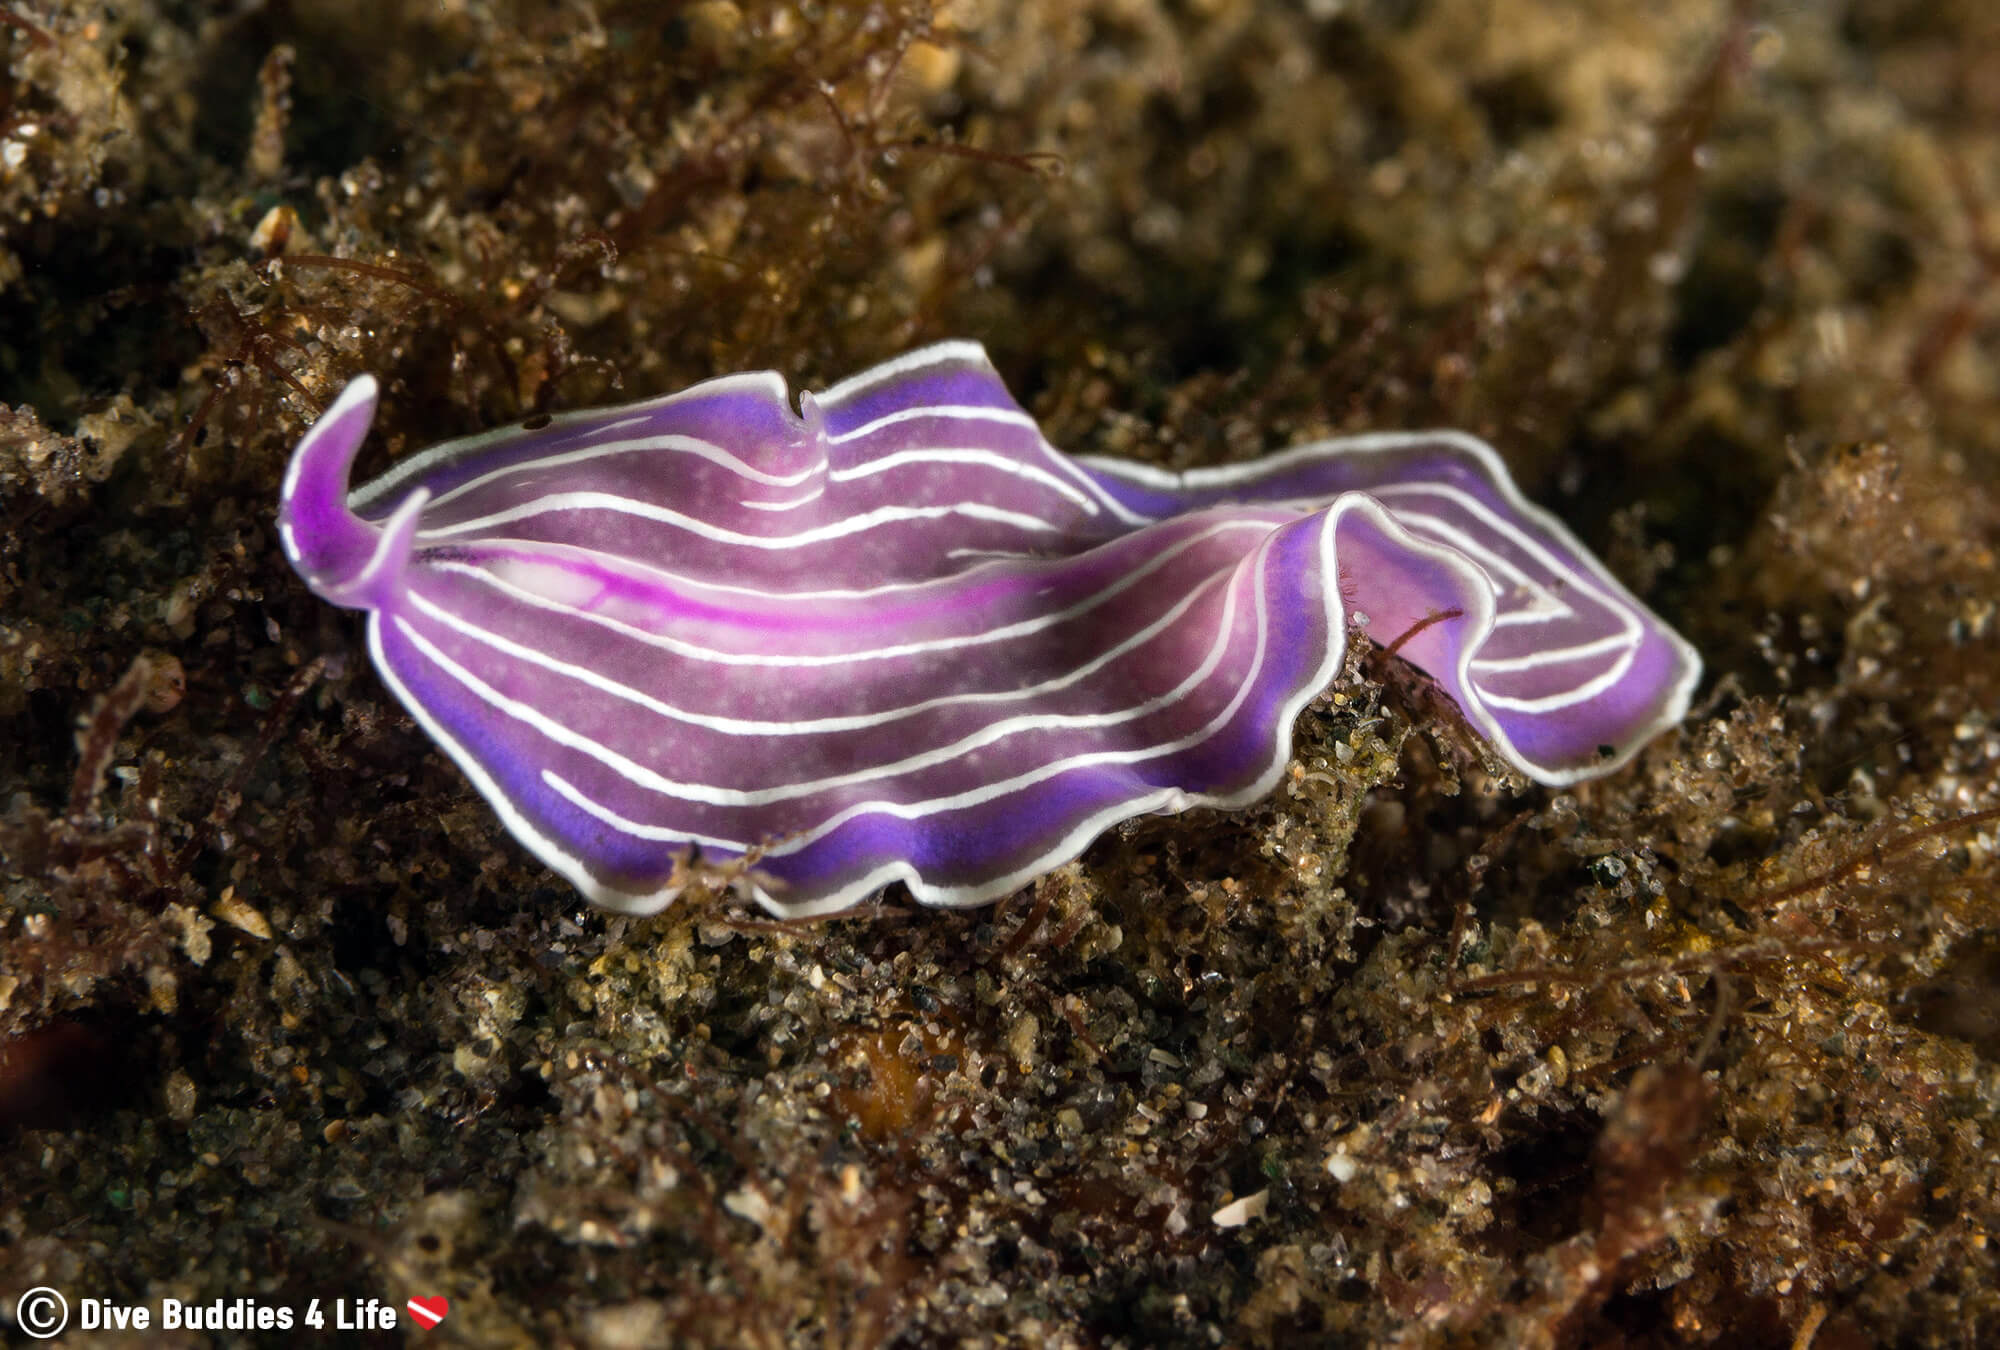 A Purple And White Flat Worm In The Ocean Floor In Costa Del Sol, Spain, Europe 